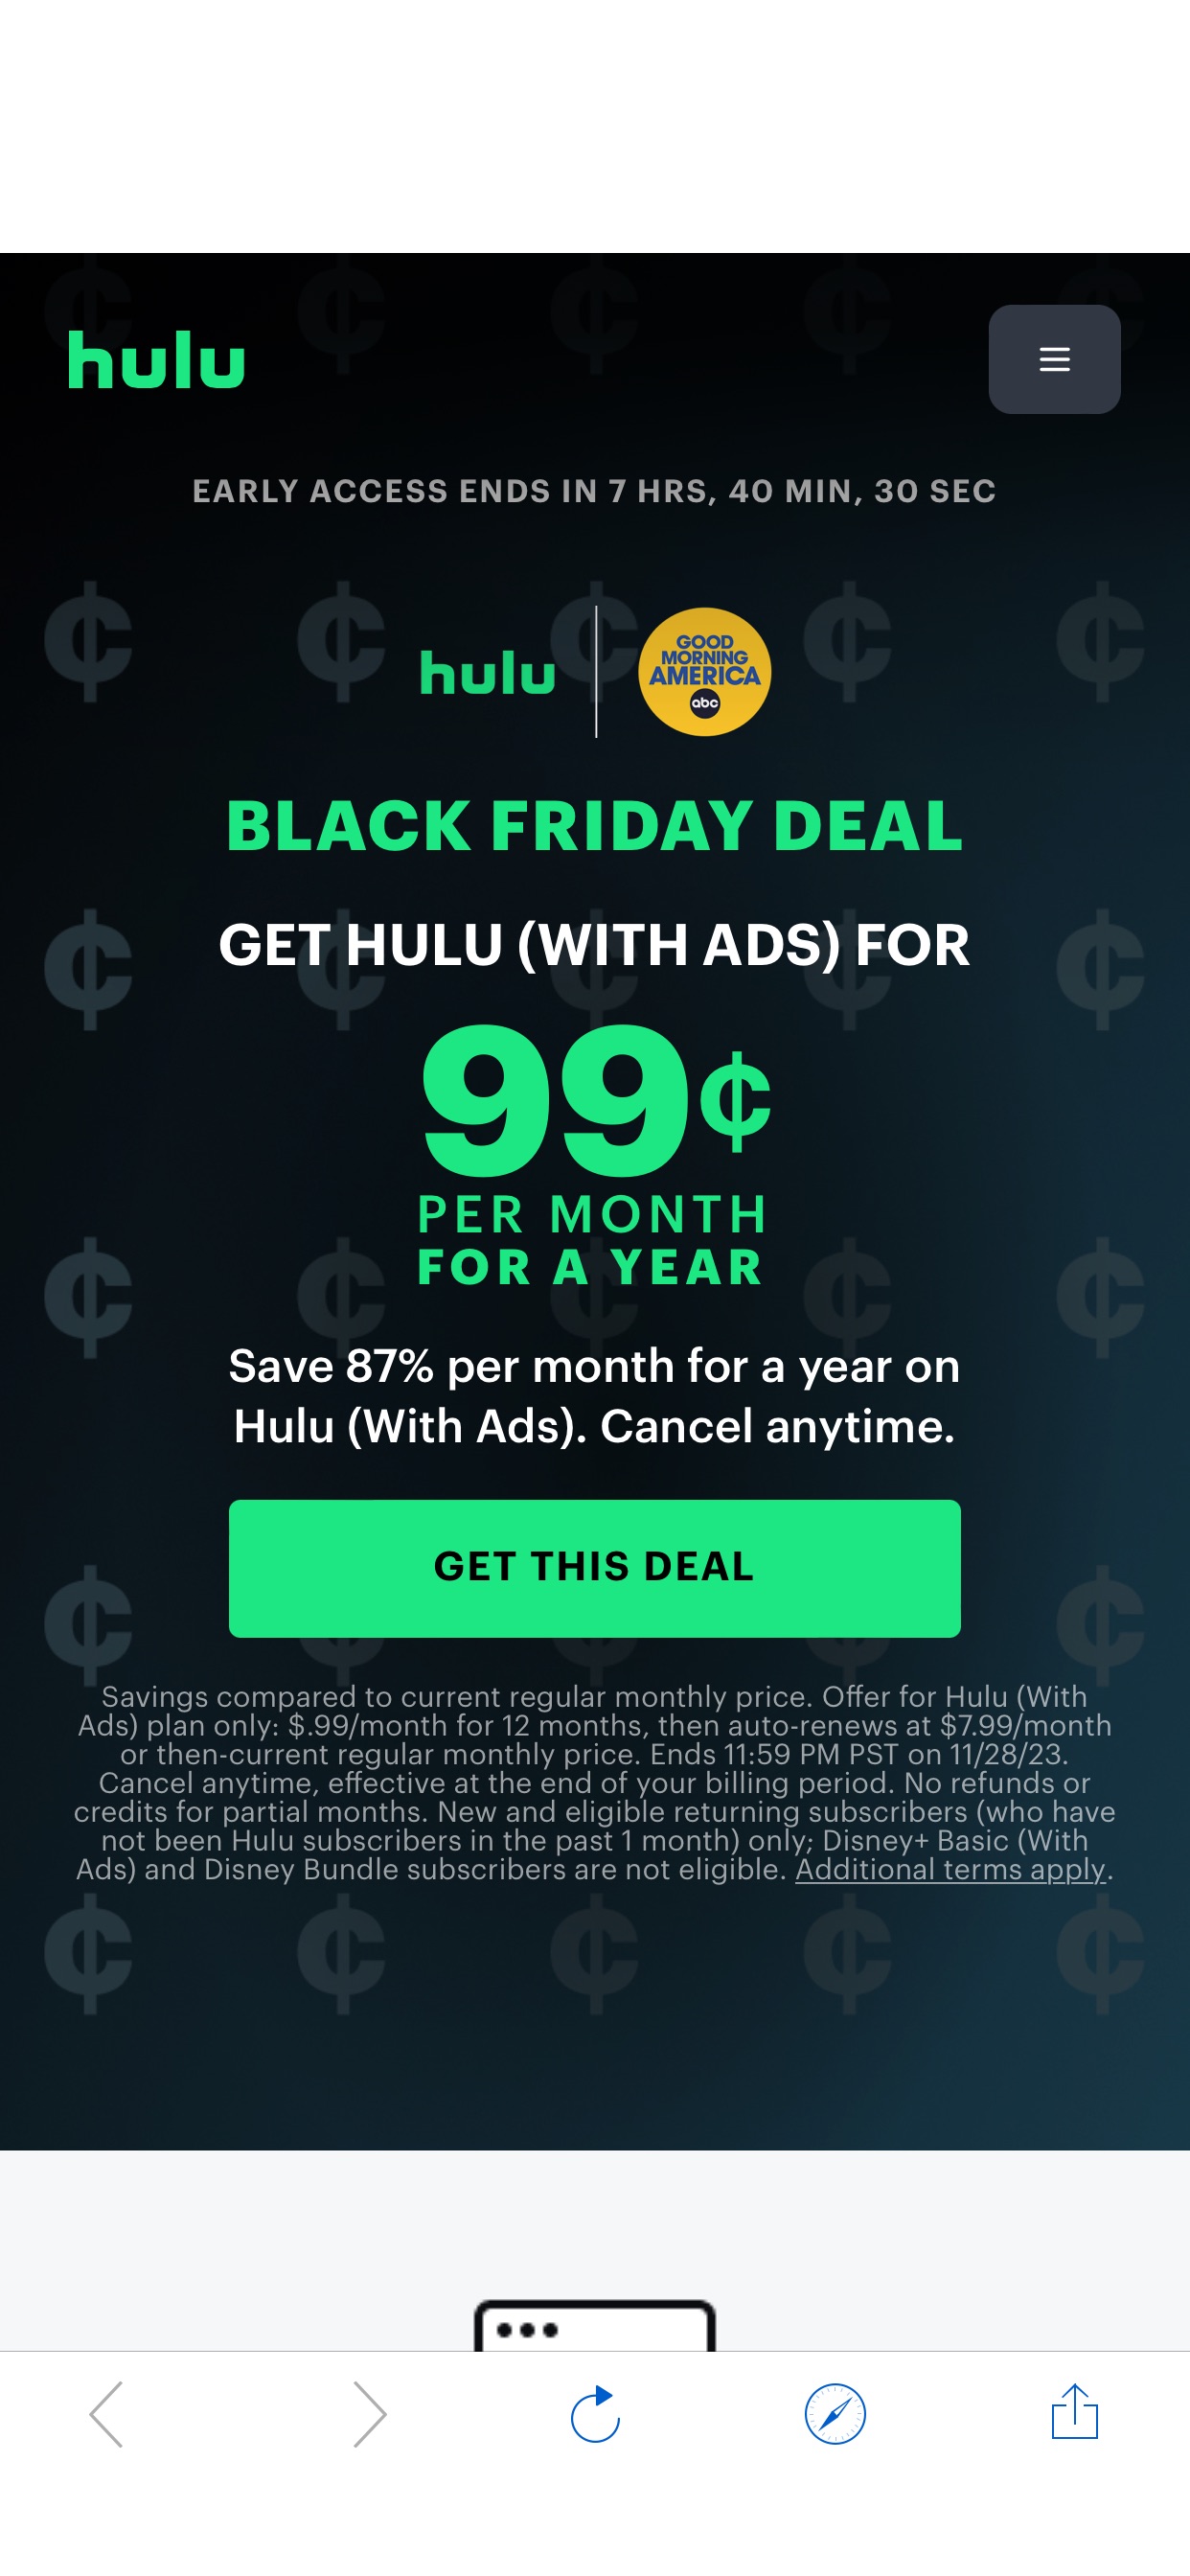 Black Friday Deal: 99¢/month for a year | Hulu